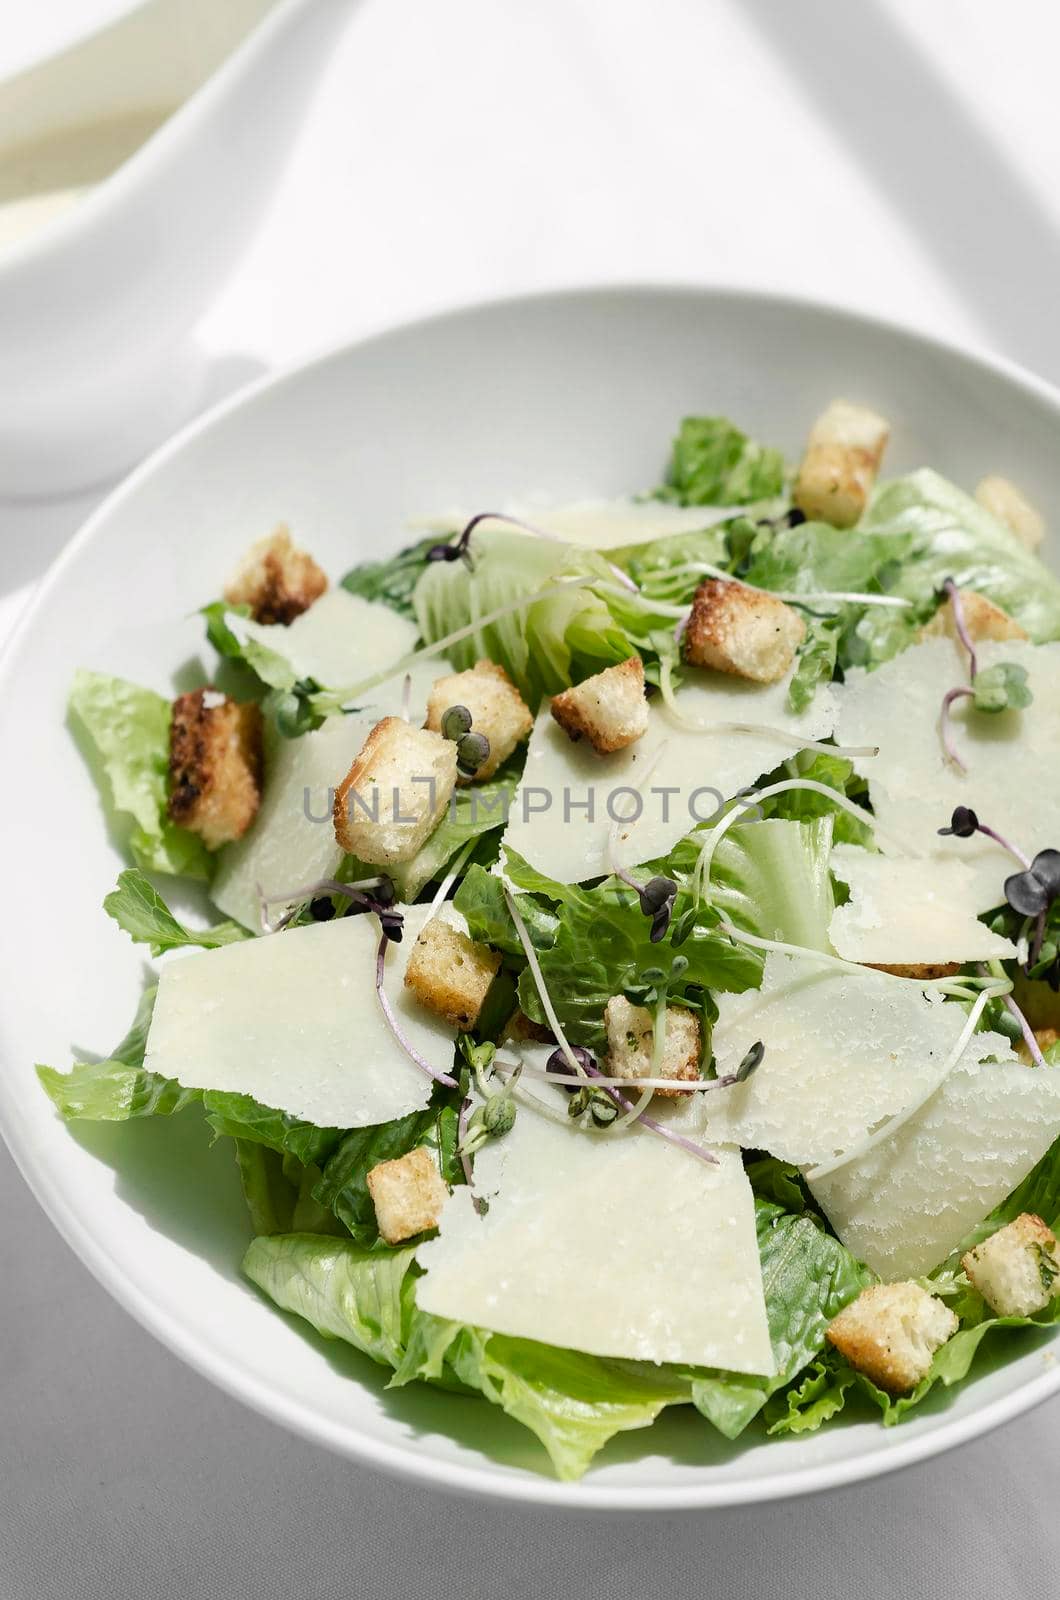 caesar salad with parmesan cheese and croutons on table
 by jackmalipan